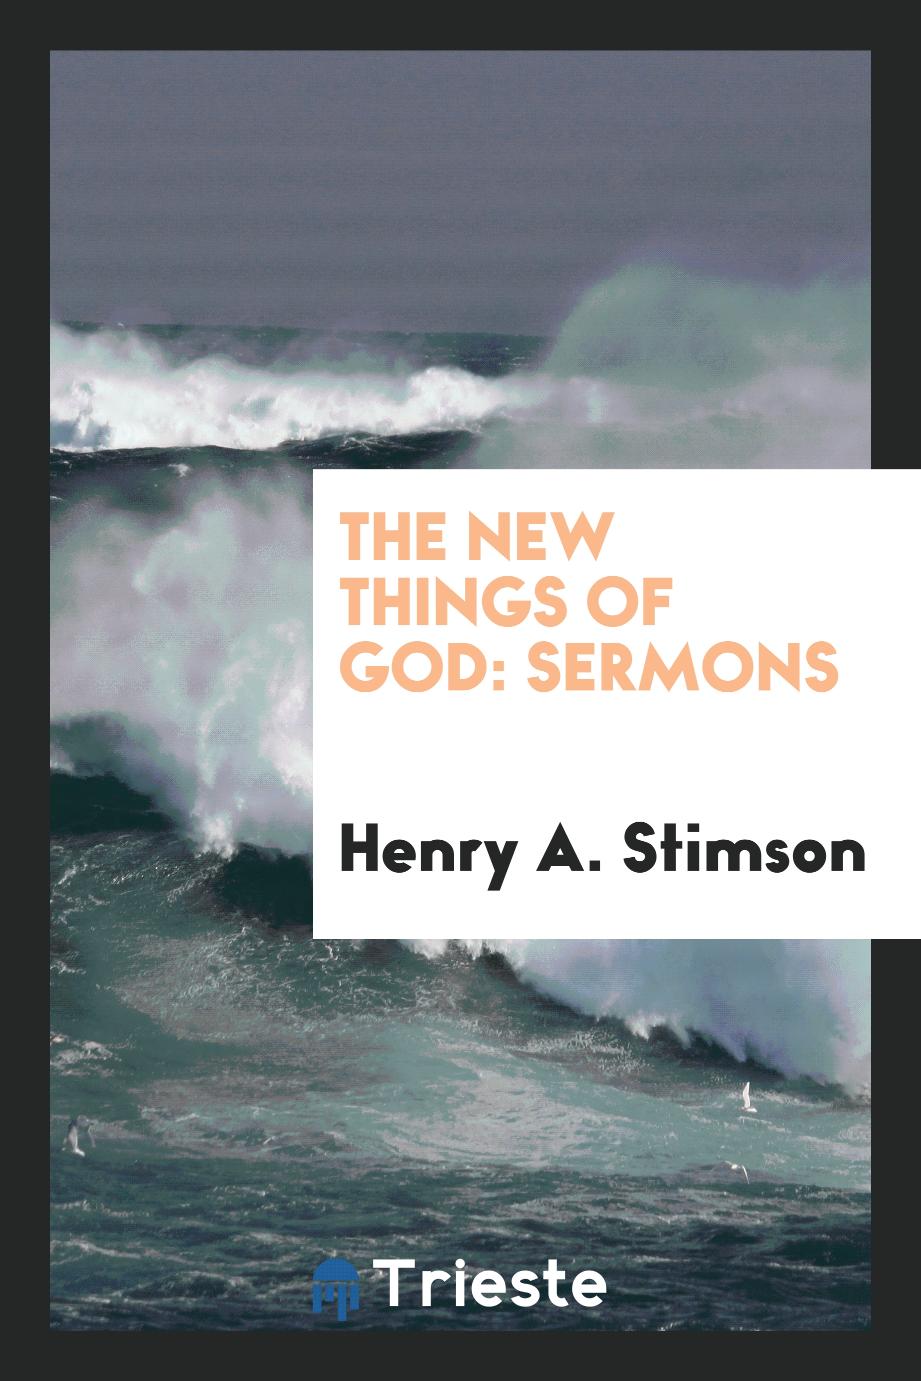 The new things of God: Sermons